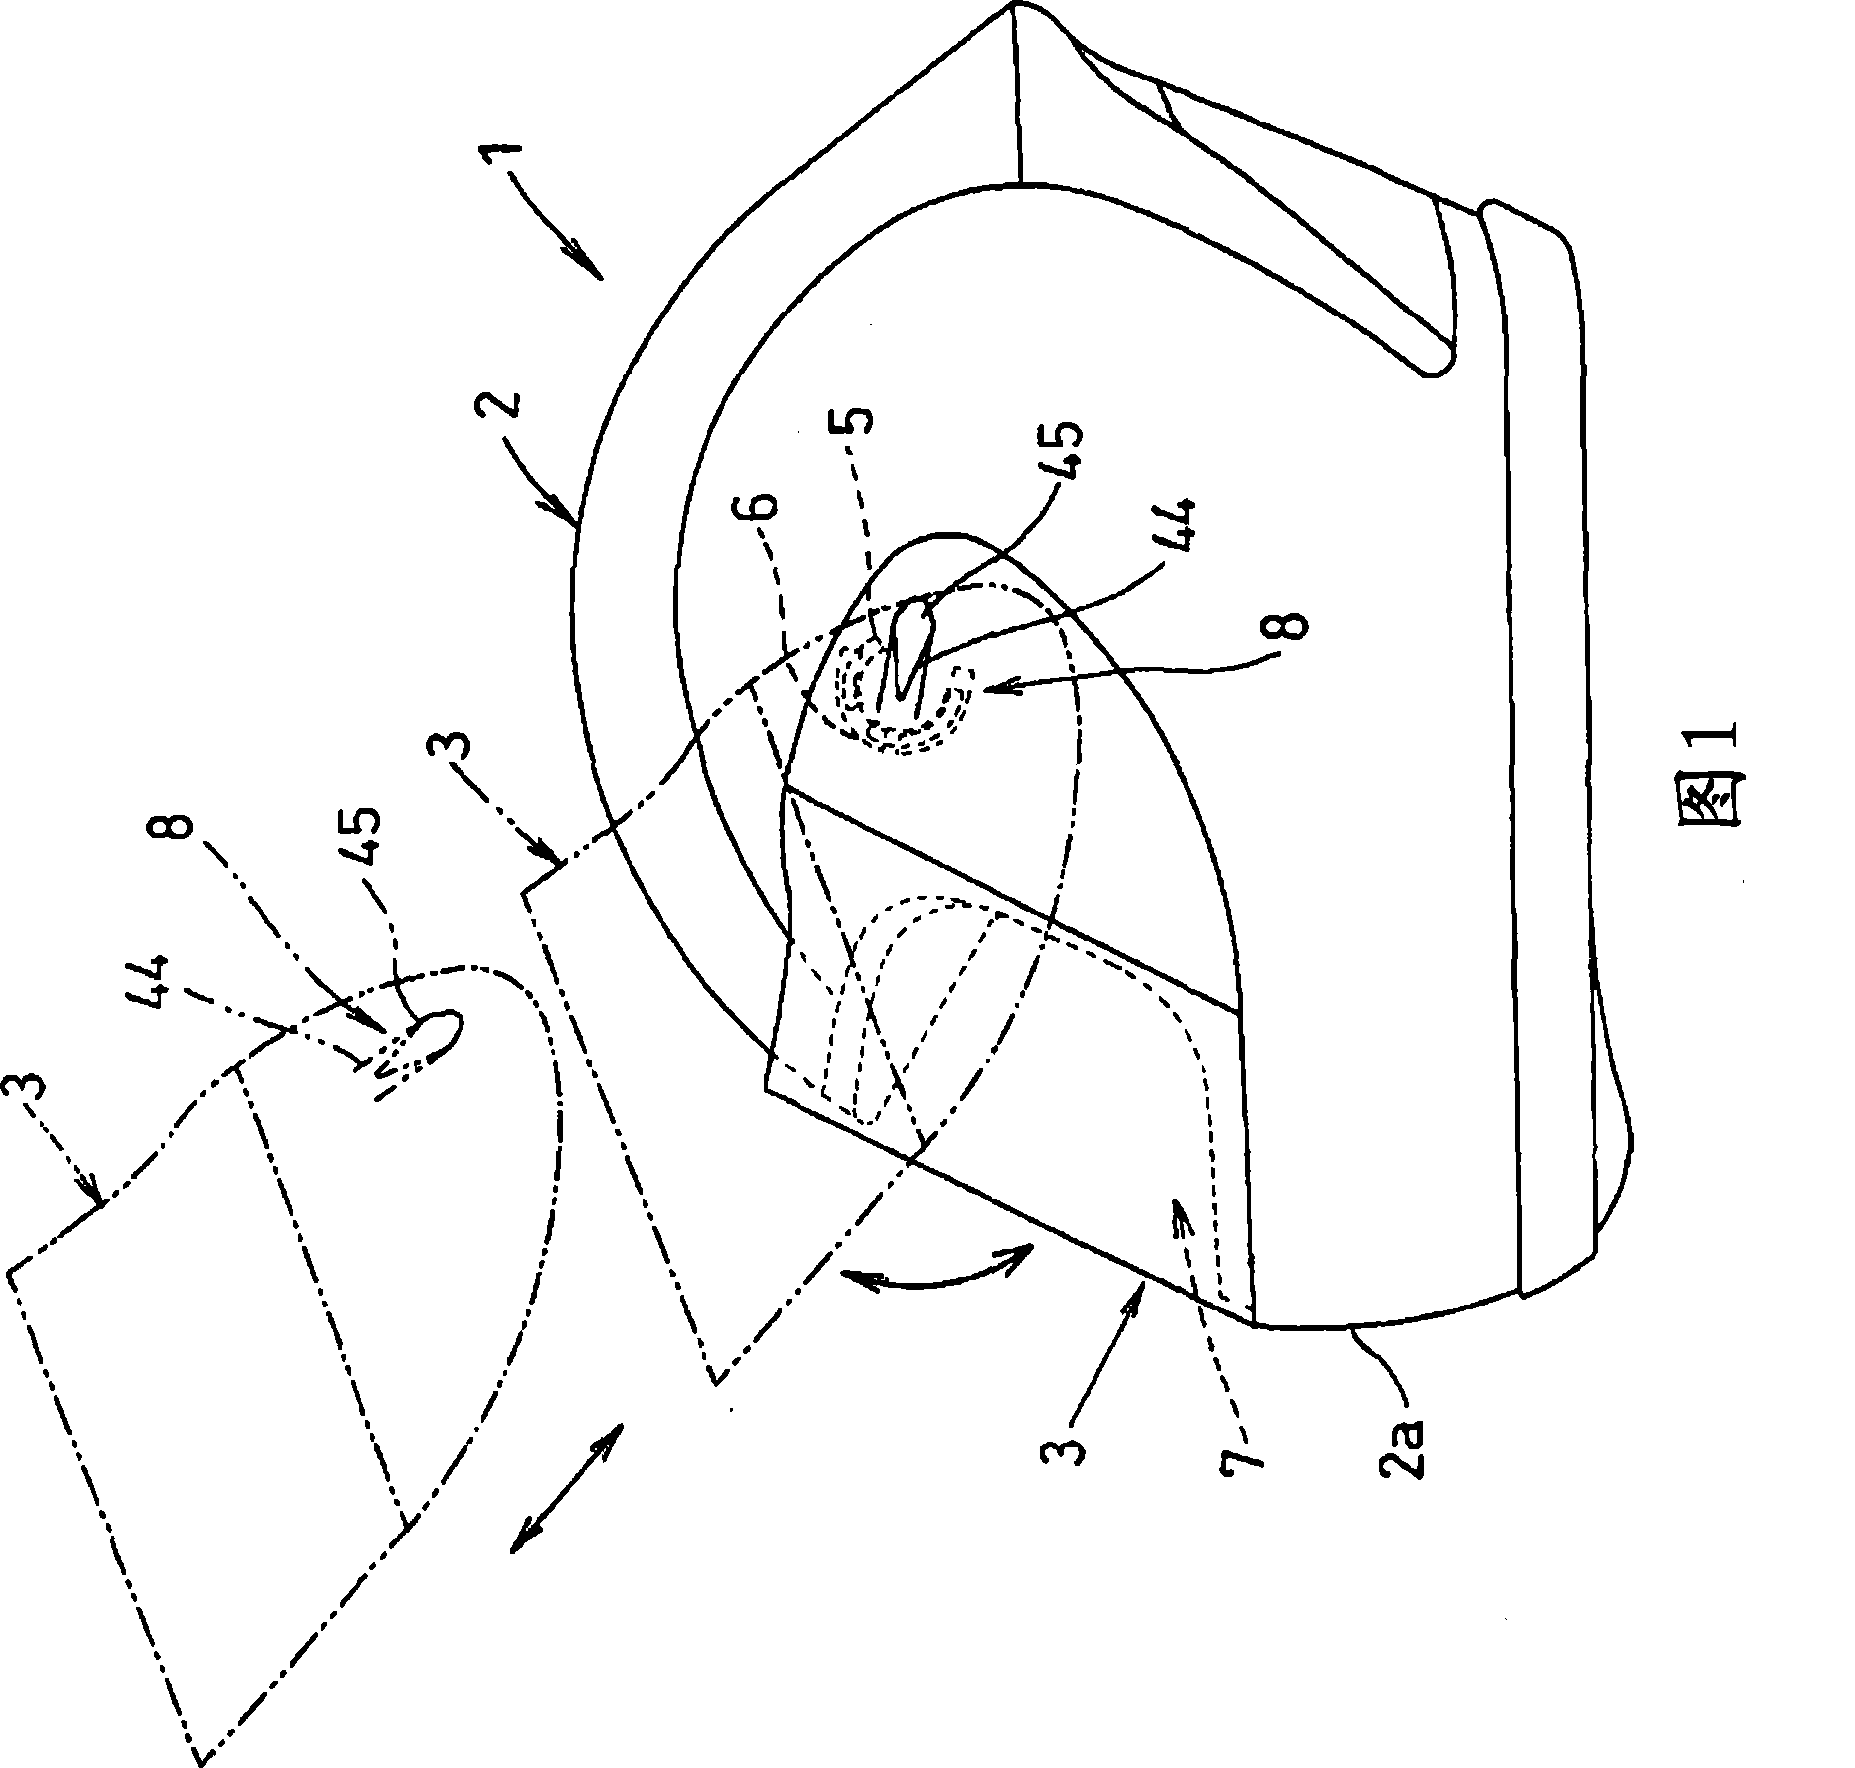 Shield mounting structure of helmet